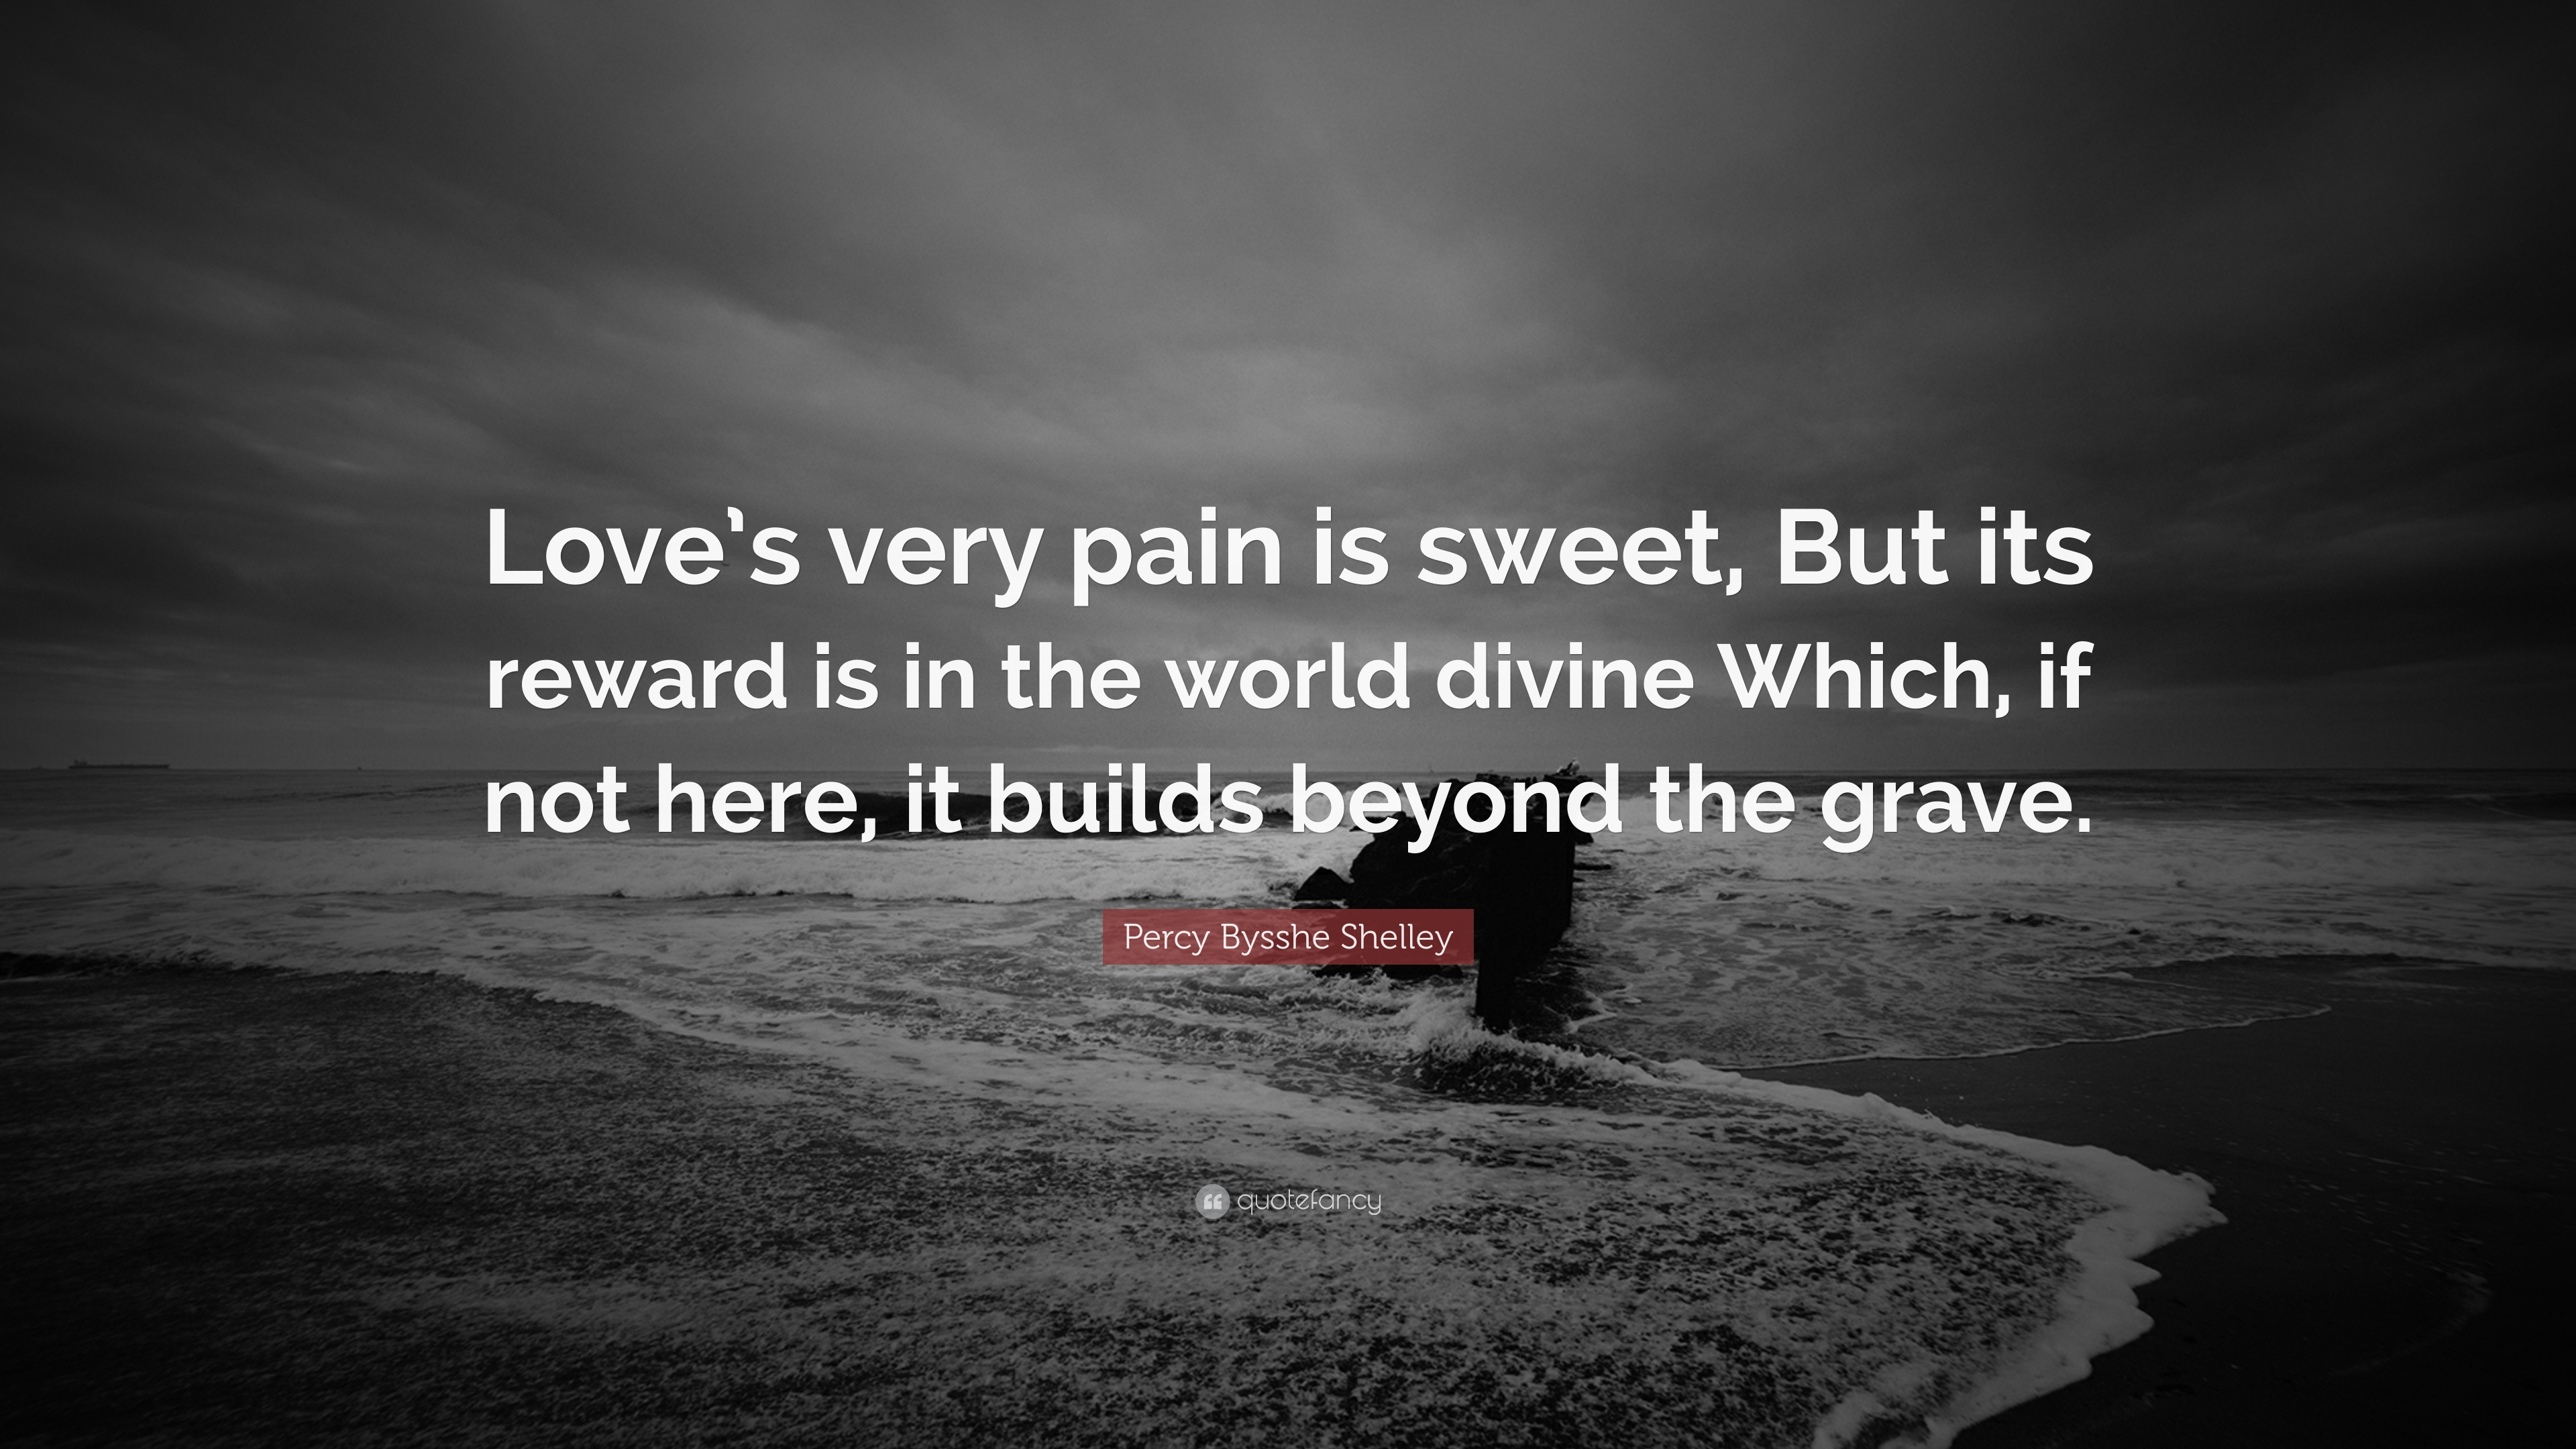 Percy Bysshe Shelley Quote “Love s very pain is sweet But its reward is